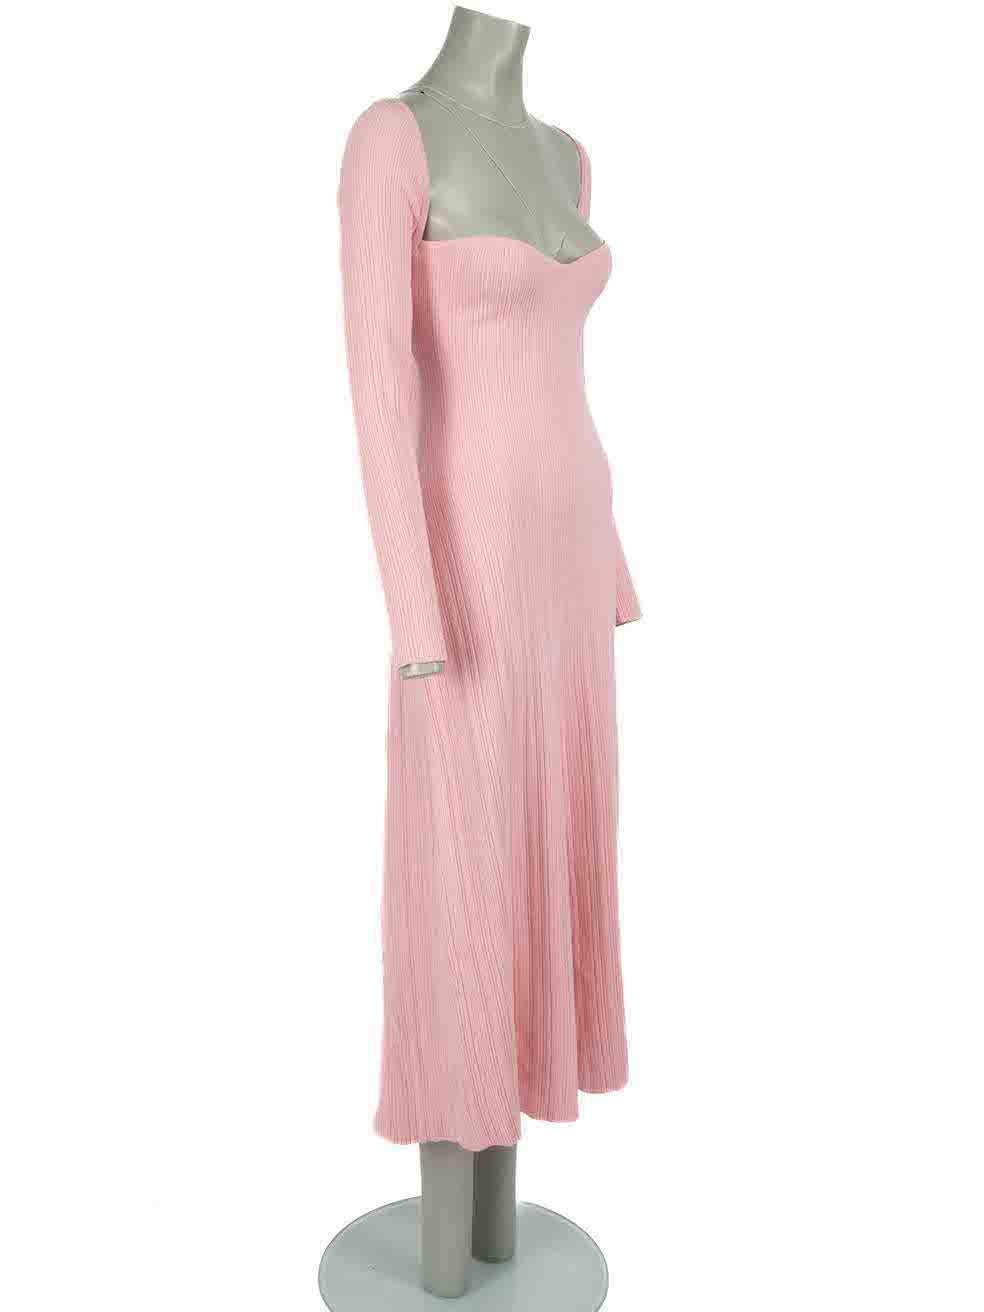 CONDITION is Very good. Minimal wear to dress is evident. Minimal stains to back of both cuffs on this used ANNA QUAN designer resale item.
 
Details
Pink
Cotton
Rib knit dress
Midi
Sweetheart neckline
Long sleeves
 
Made in China
 
Composition
88%